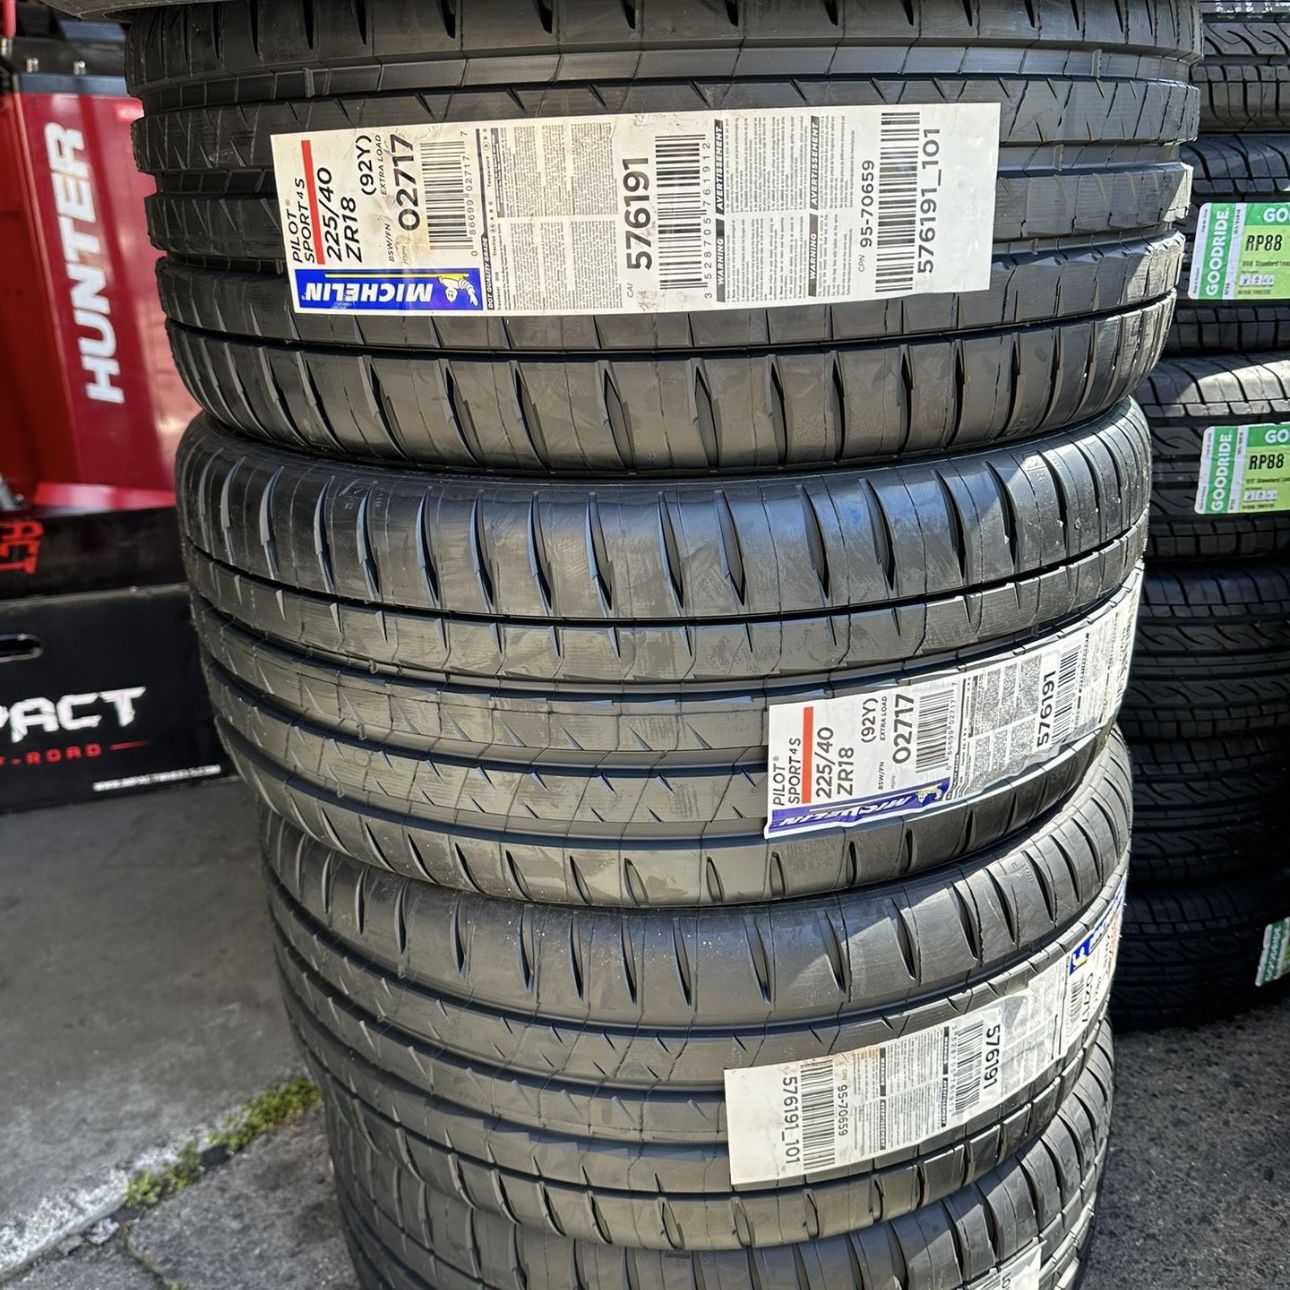 New Tire 225/40R18 Michelin Pilot Sport 4S 92Y Set Of 4 Tires Finance Available